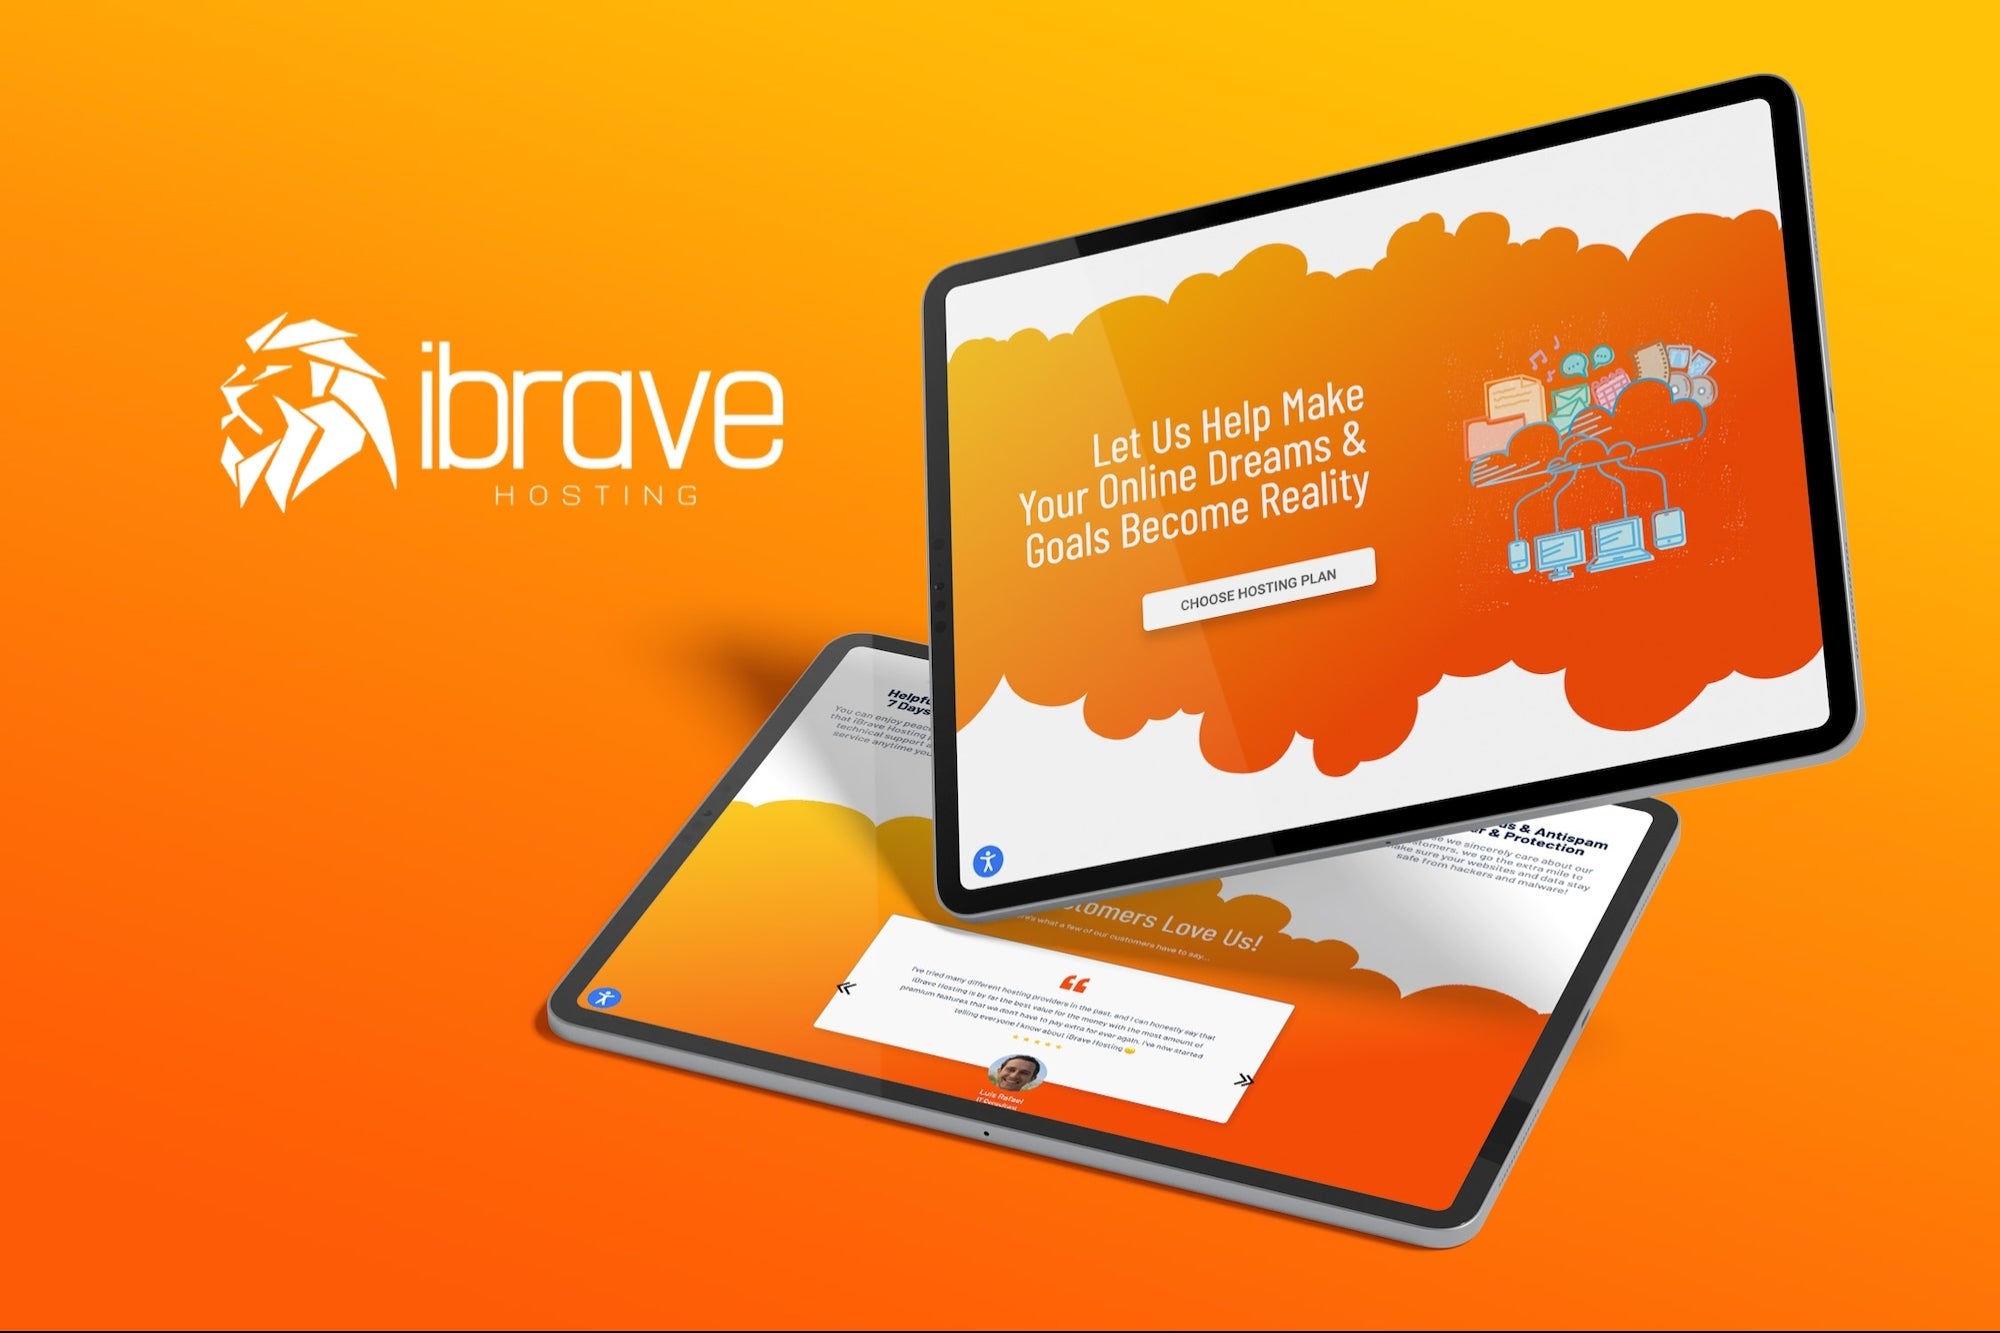 Host Your Web exclaim with iBrave — $90 for Existence By March 24